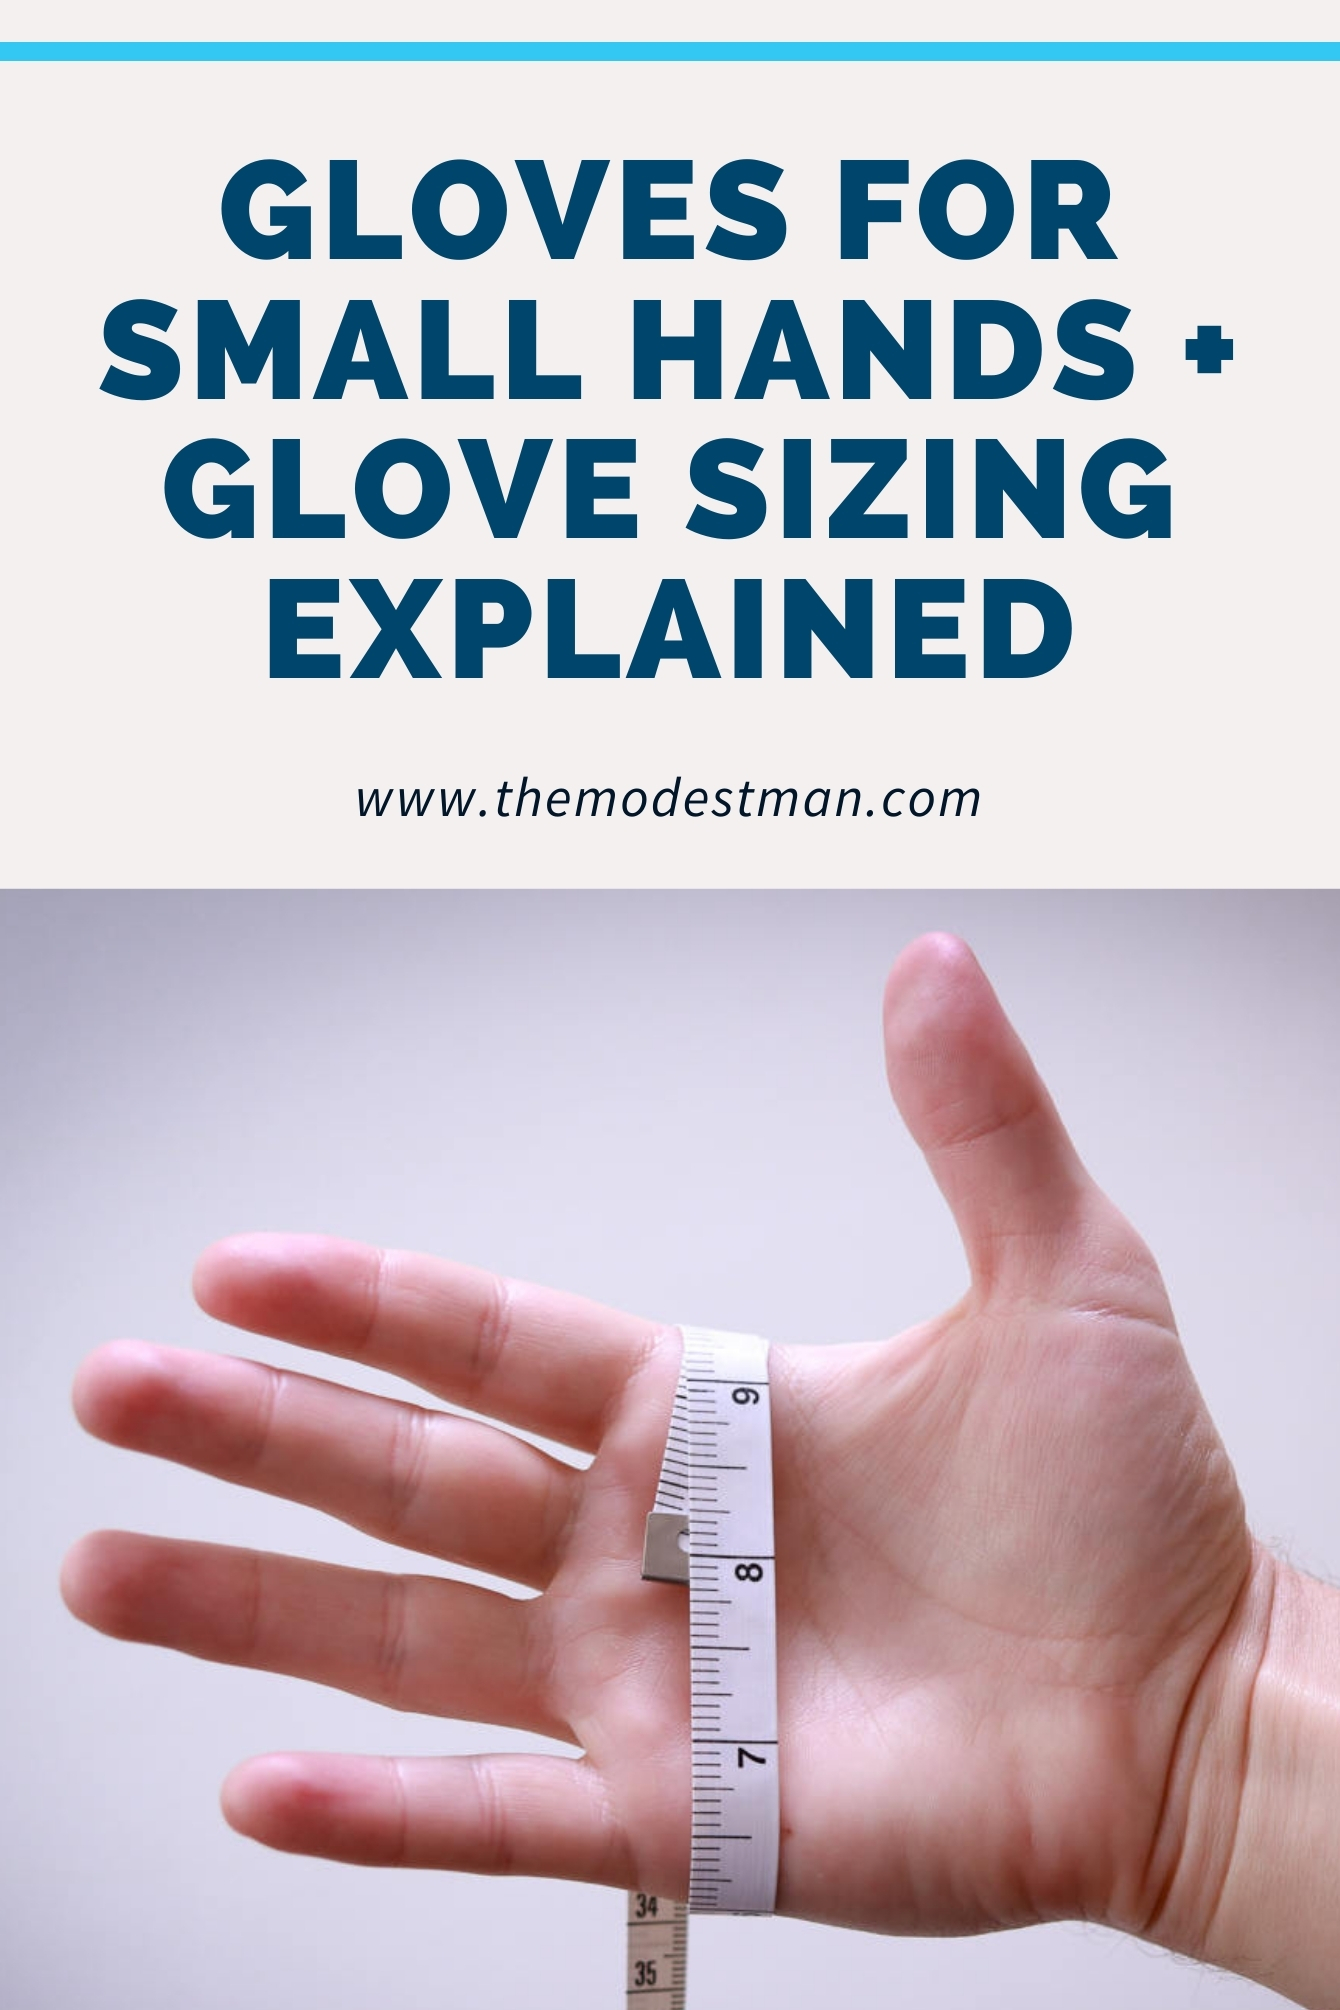 Gloves for Small Hands